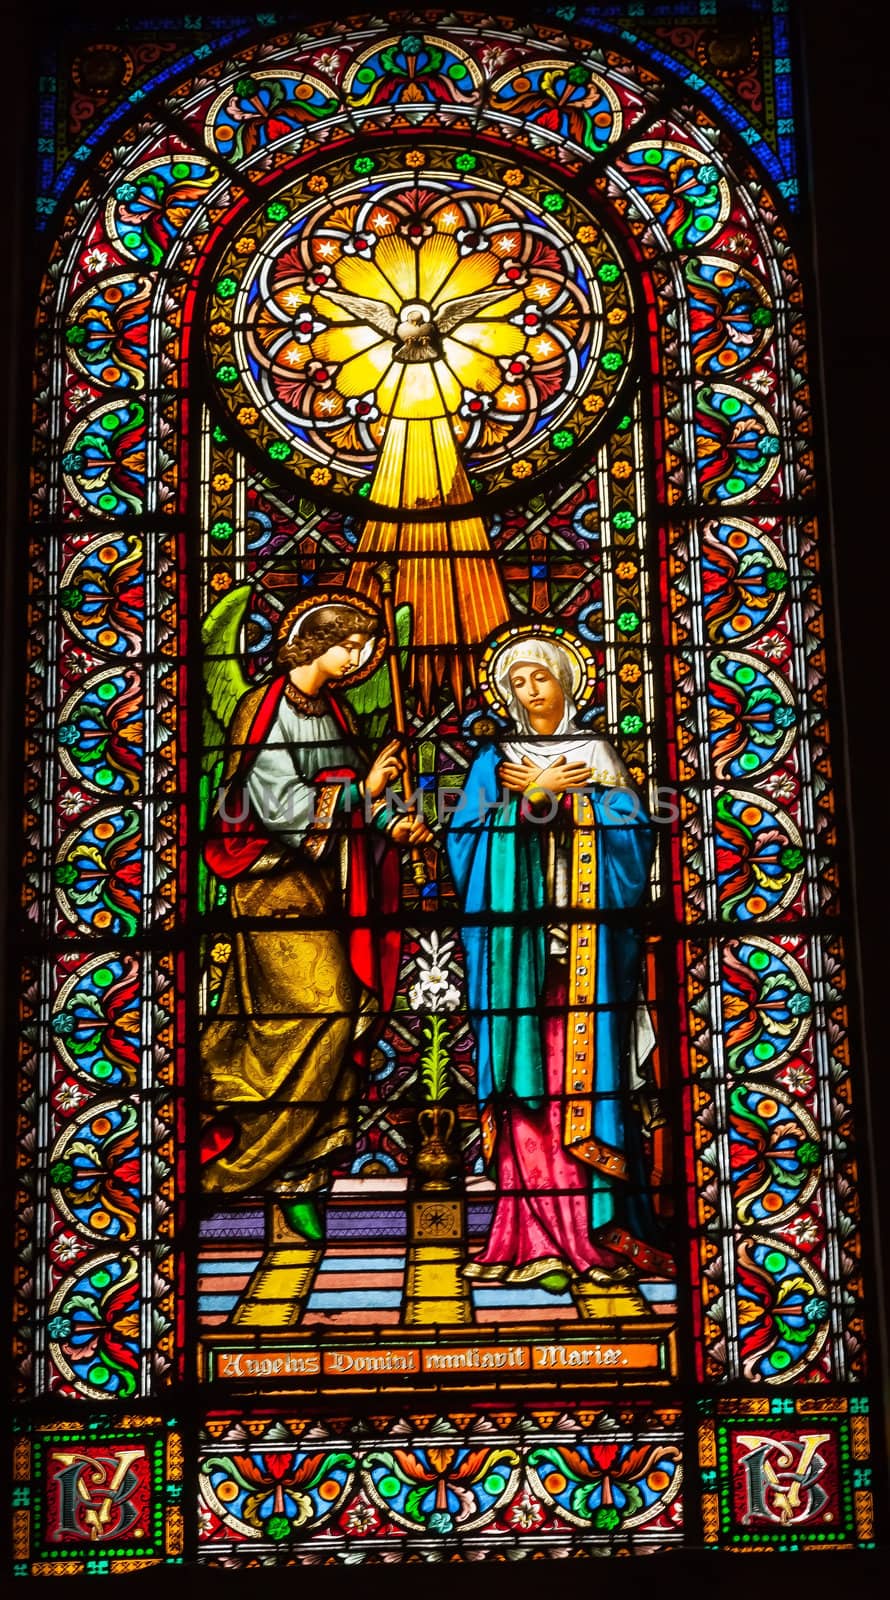 CATALONIA, SPAIN--OCTOBER 18, 2012  Stained glass angel tells Mary she will have Jesus holy spirit in Monestir Monastery of Montserrat, Barcelona, Catalonia, Spain on October 18, 2012.  Founded in the 9th century, destroyed in 1811 when French invaded Spain. Rebuilt in 1844 and now a Benedictine monastery.  Placa de Santa Maria.